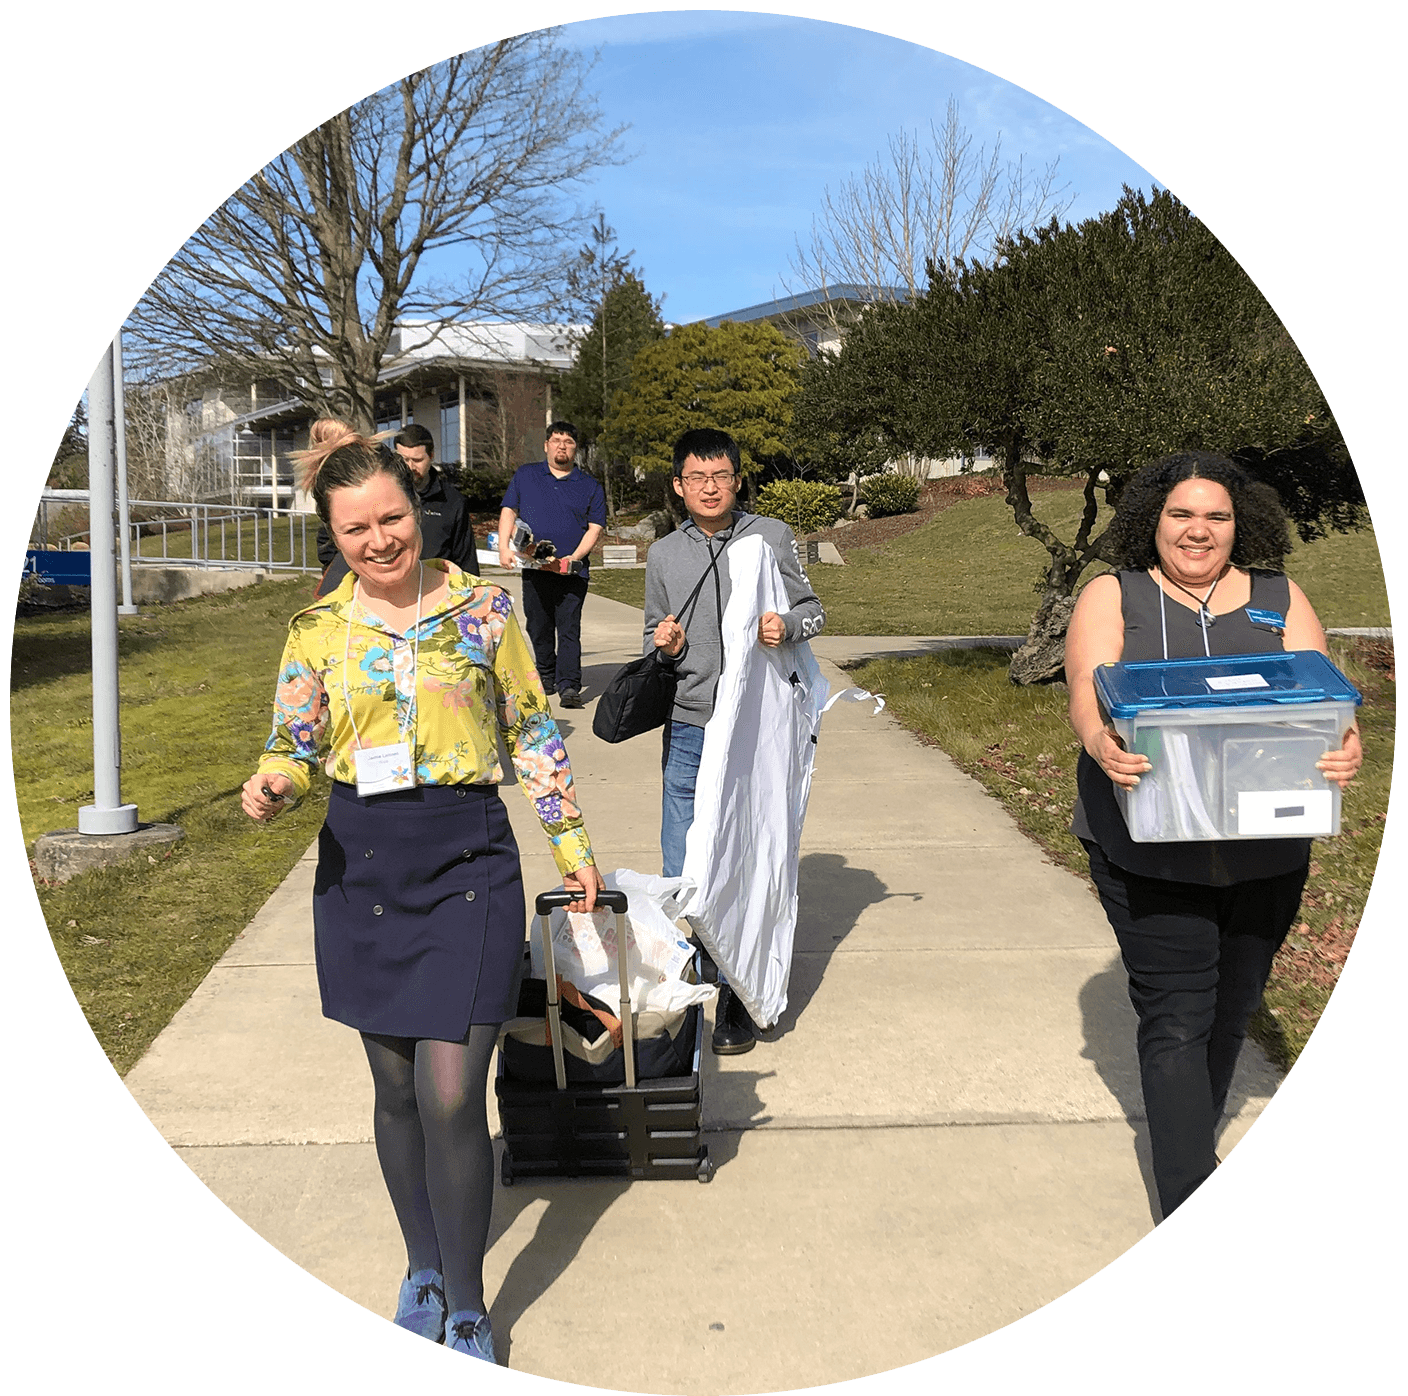 Image: Circular photo of Wise staff, Wise associate, Wise Workstudy student, and Highline Acheive Volunteer loading out gear after the Highline Transition Resource Fair.